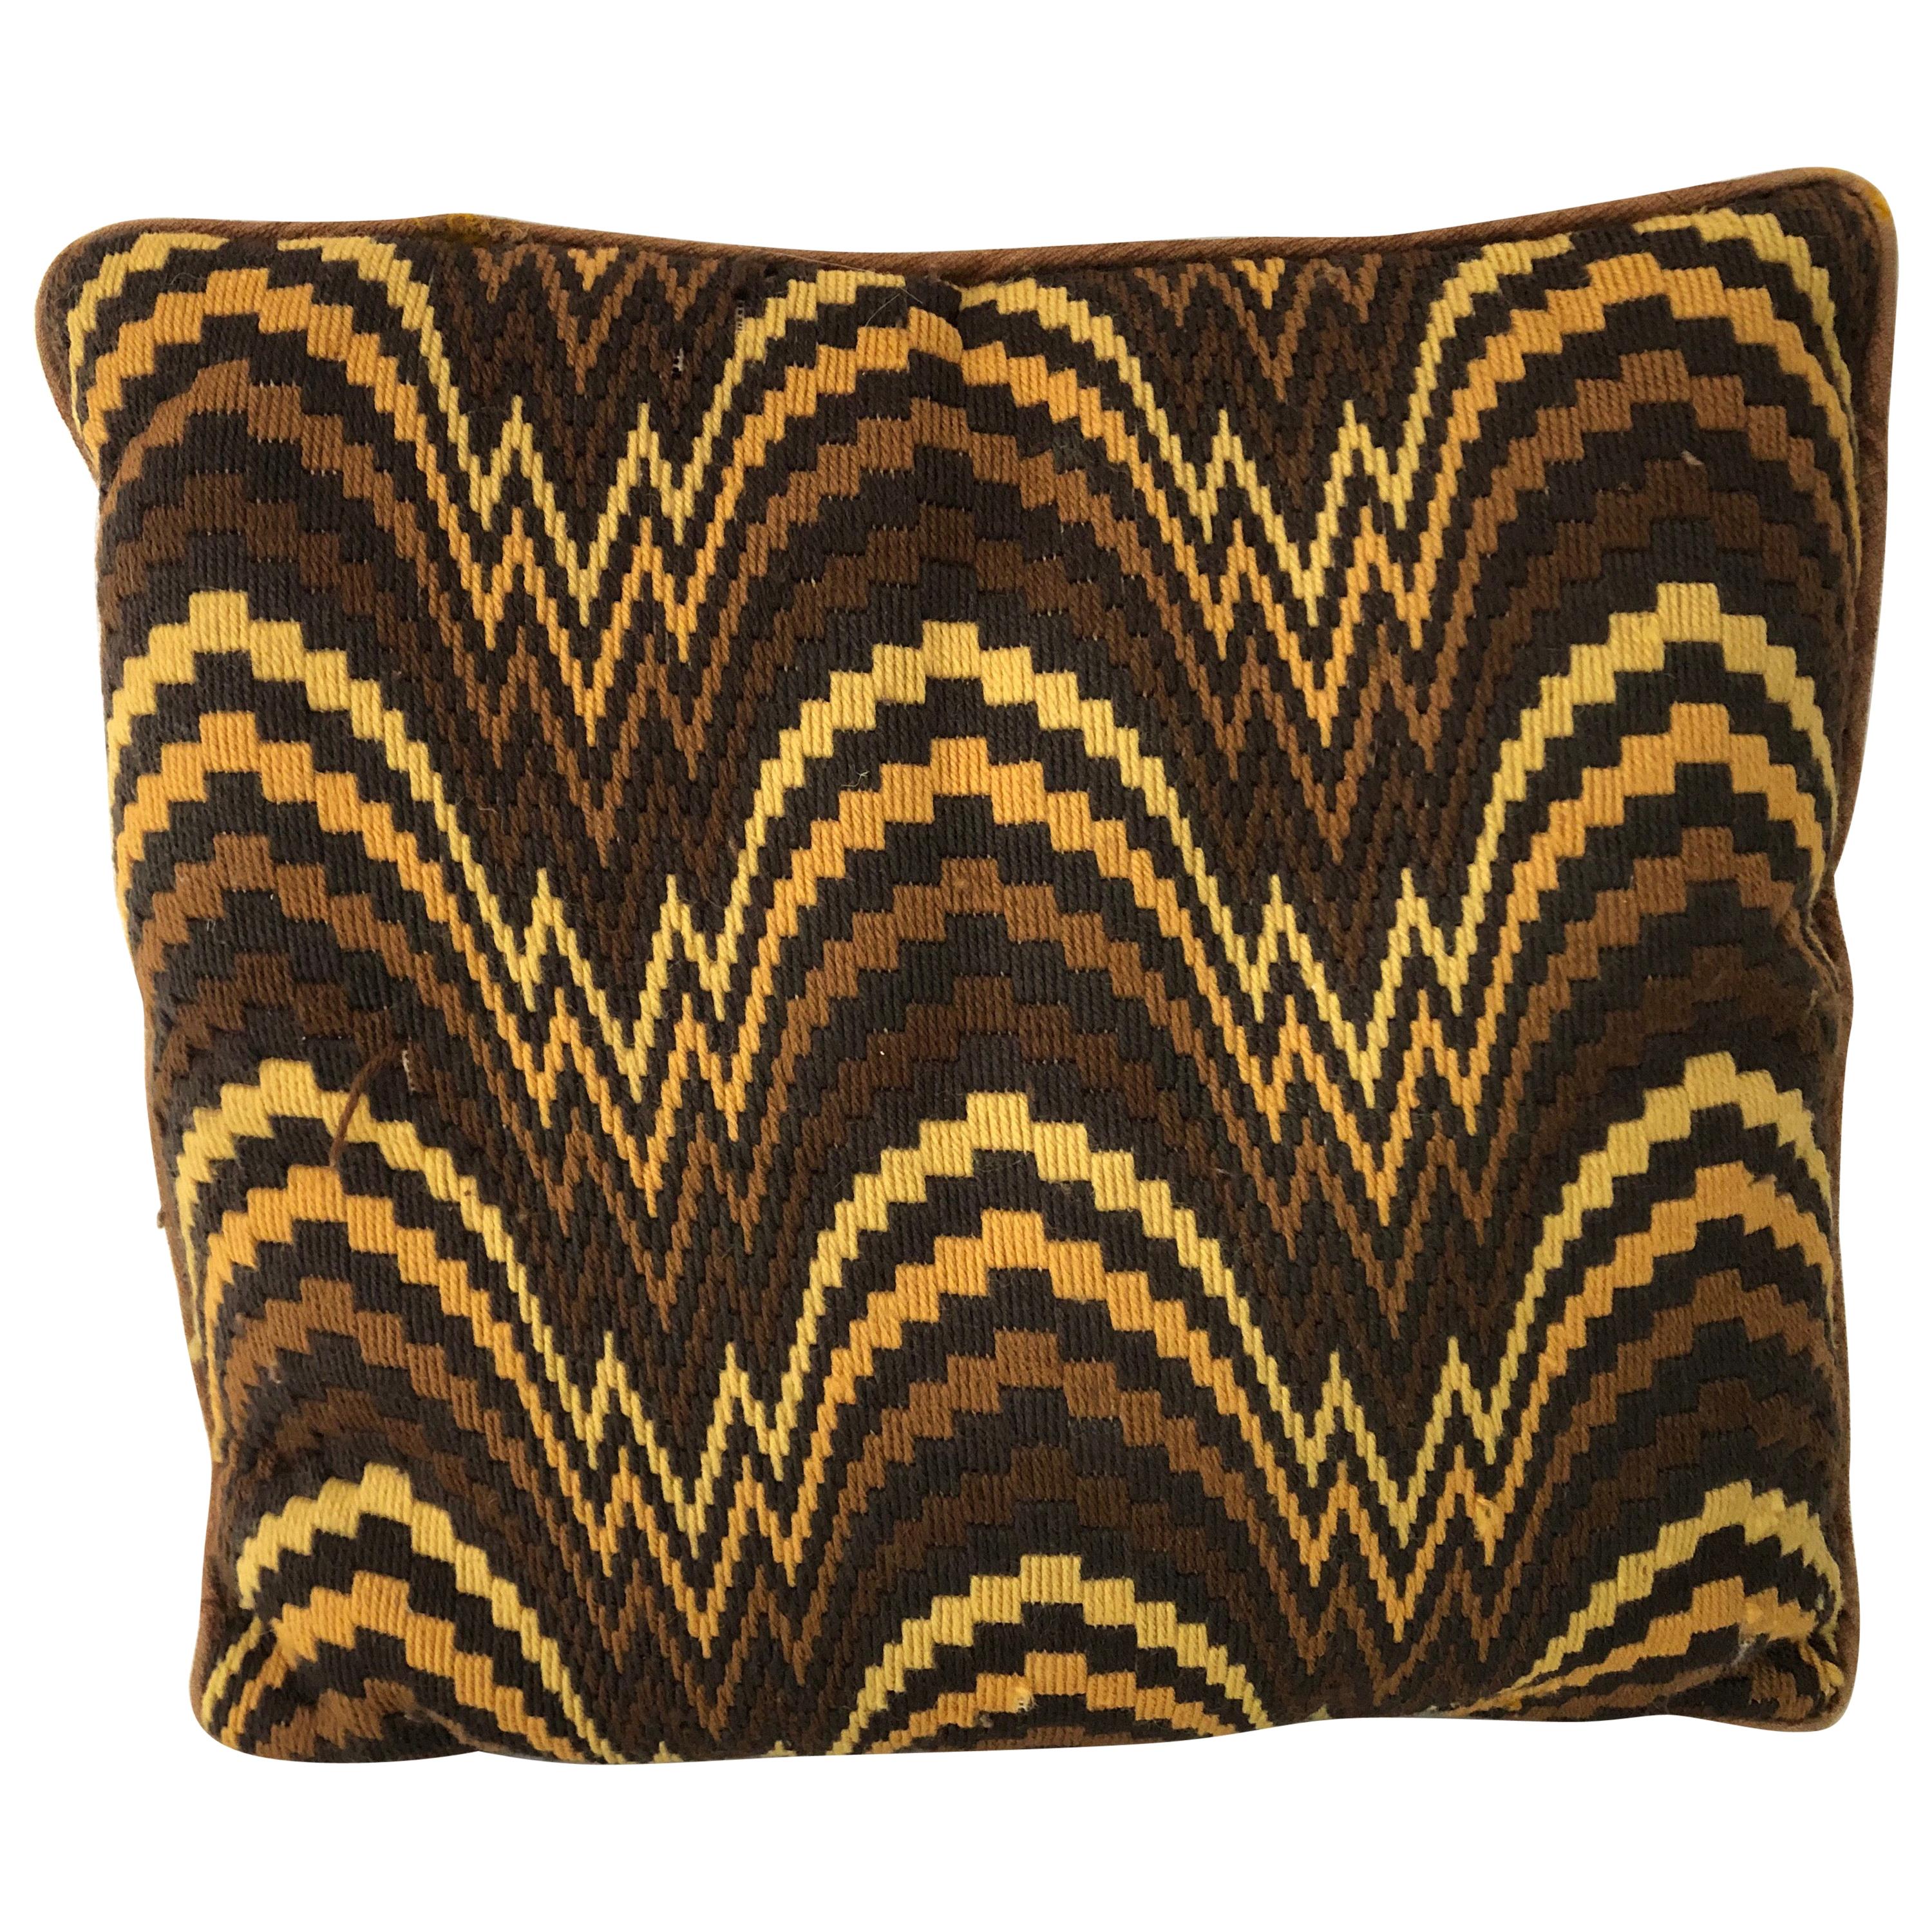 Midcentury Flame Stitch Pillow